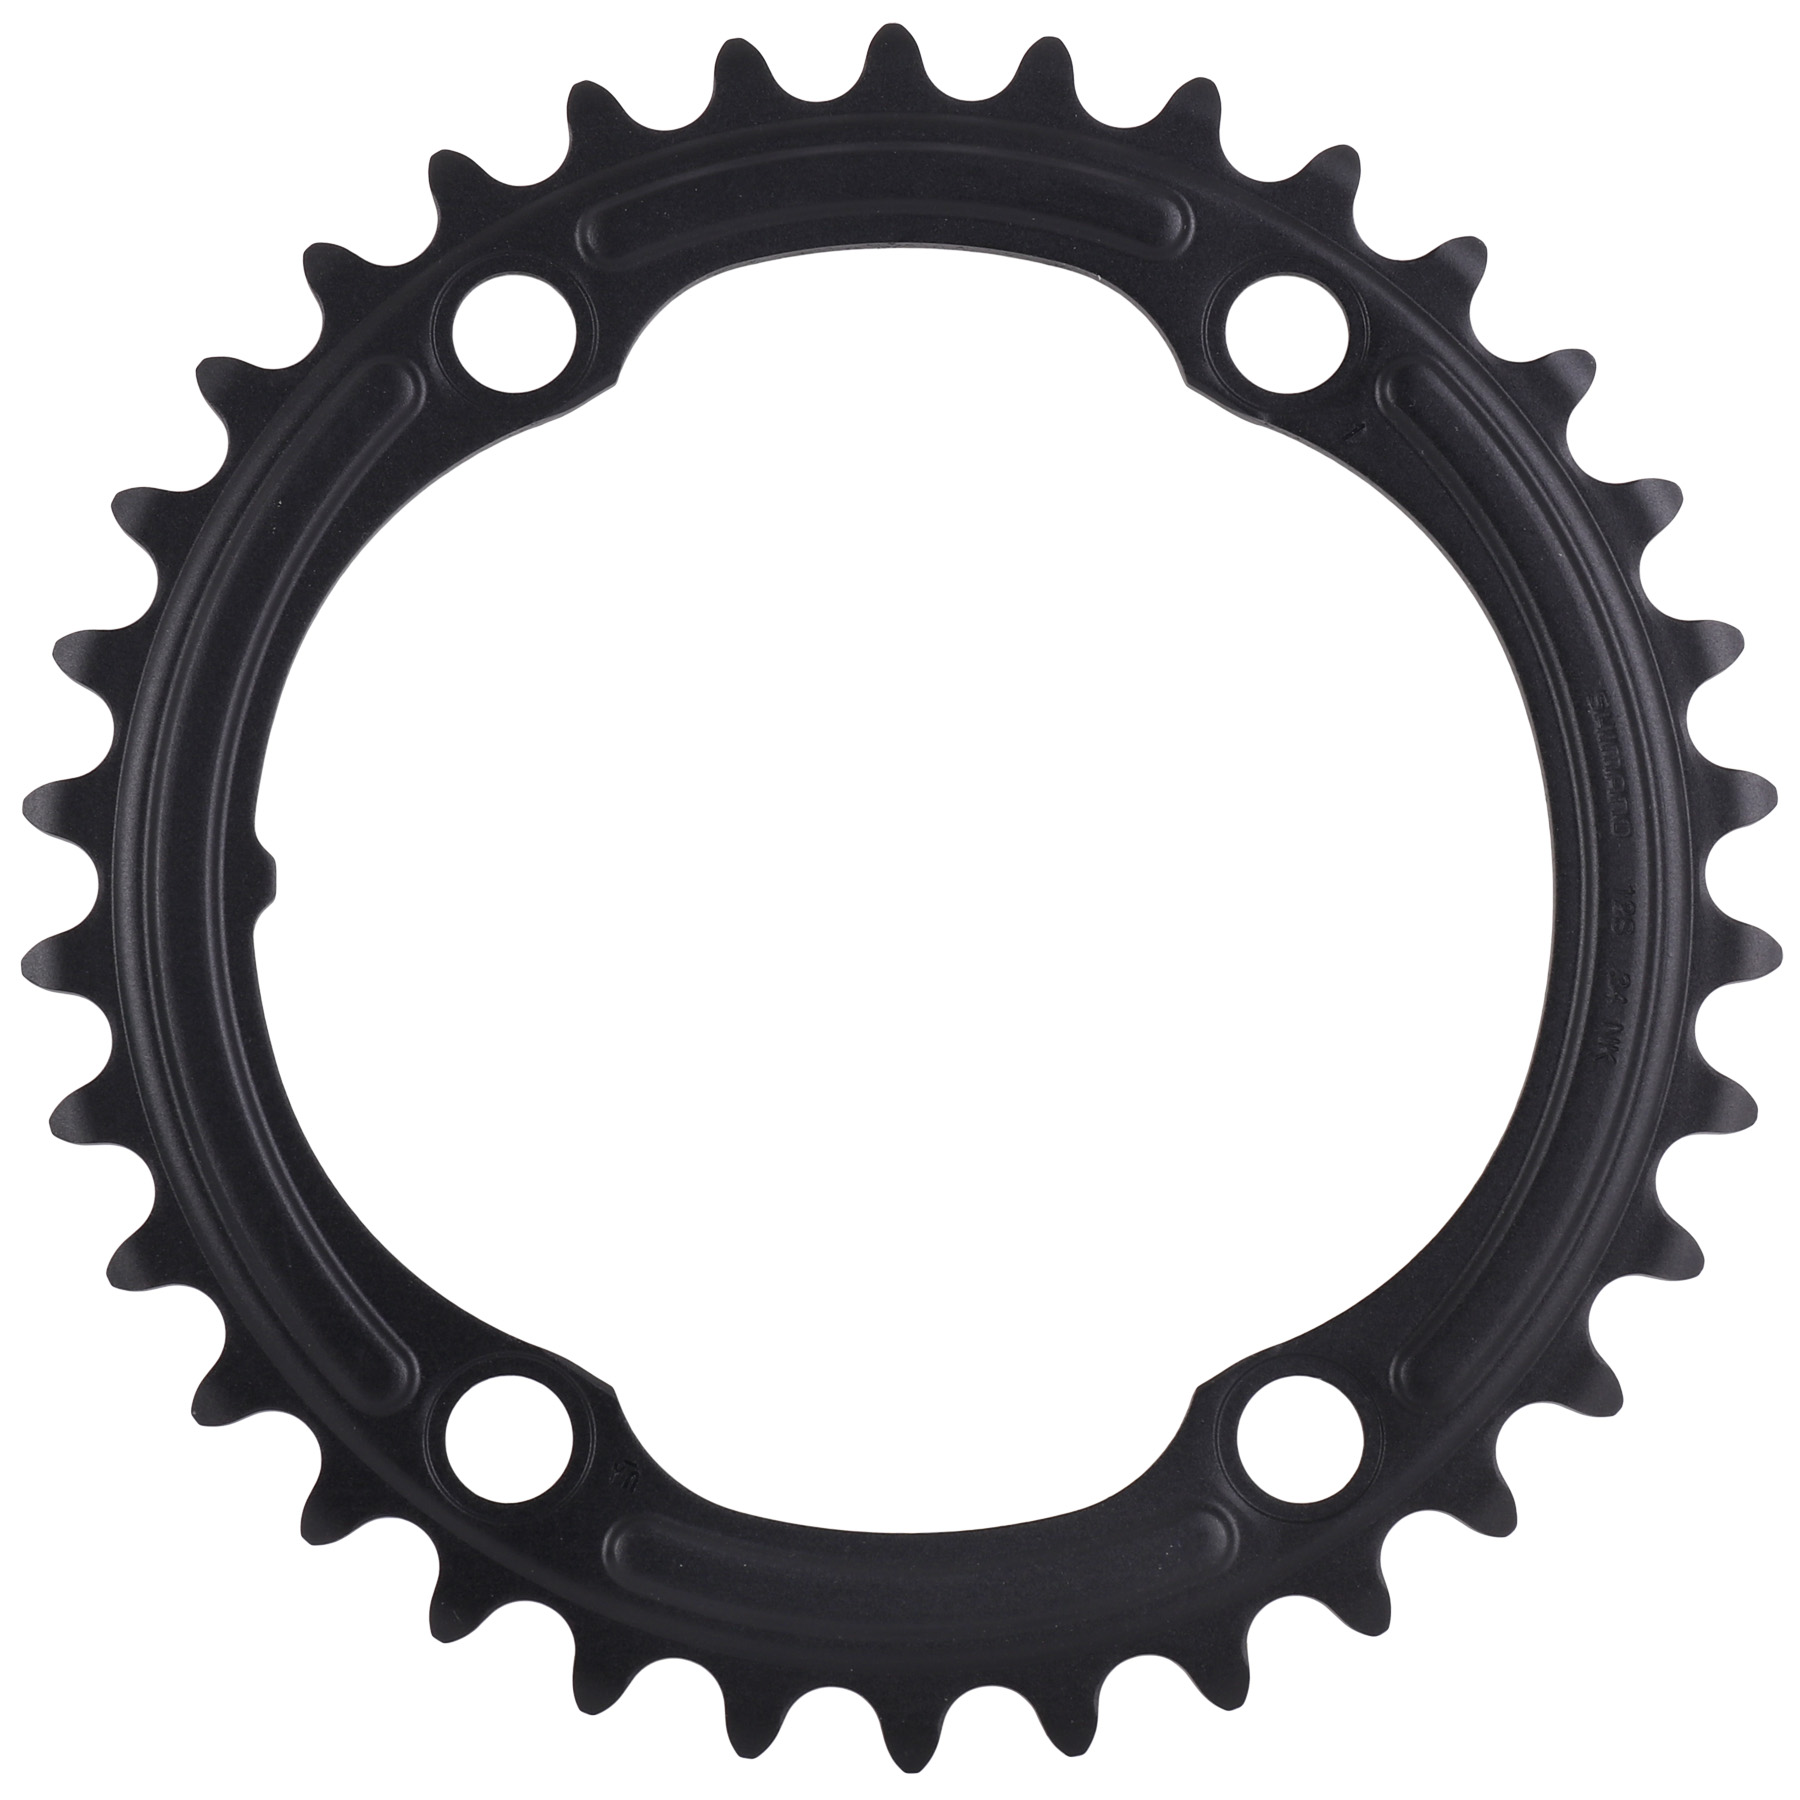 Image of Shimano Chainring for 105 FC-R7100 Crankset - inner